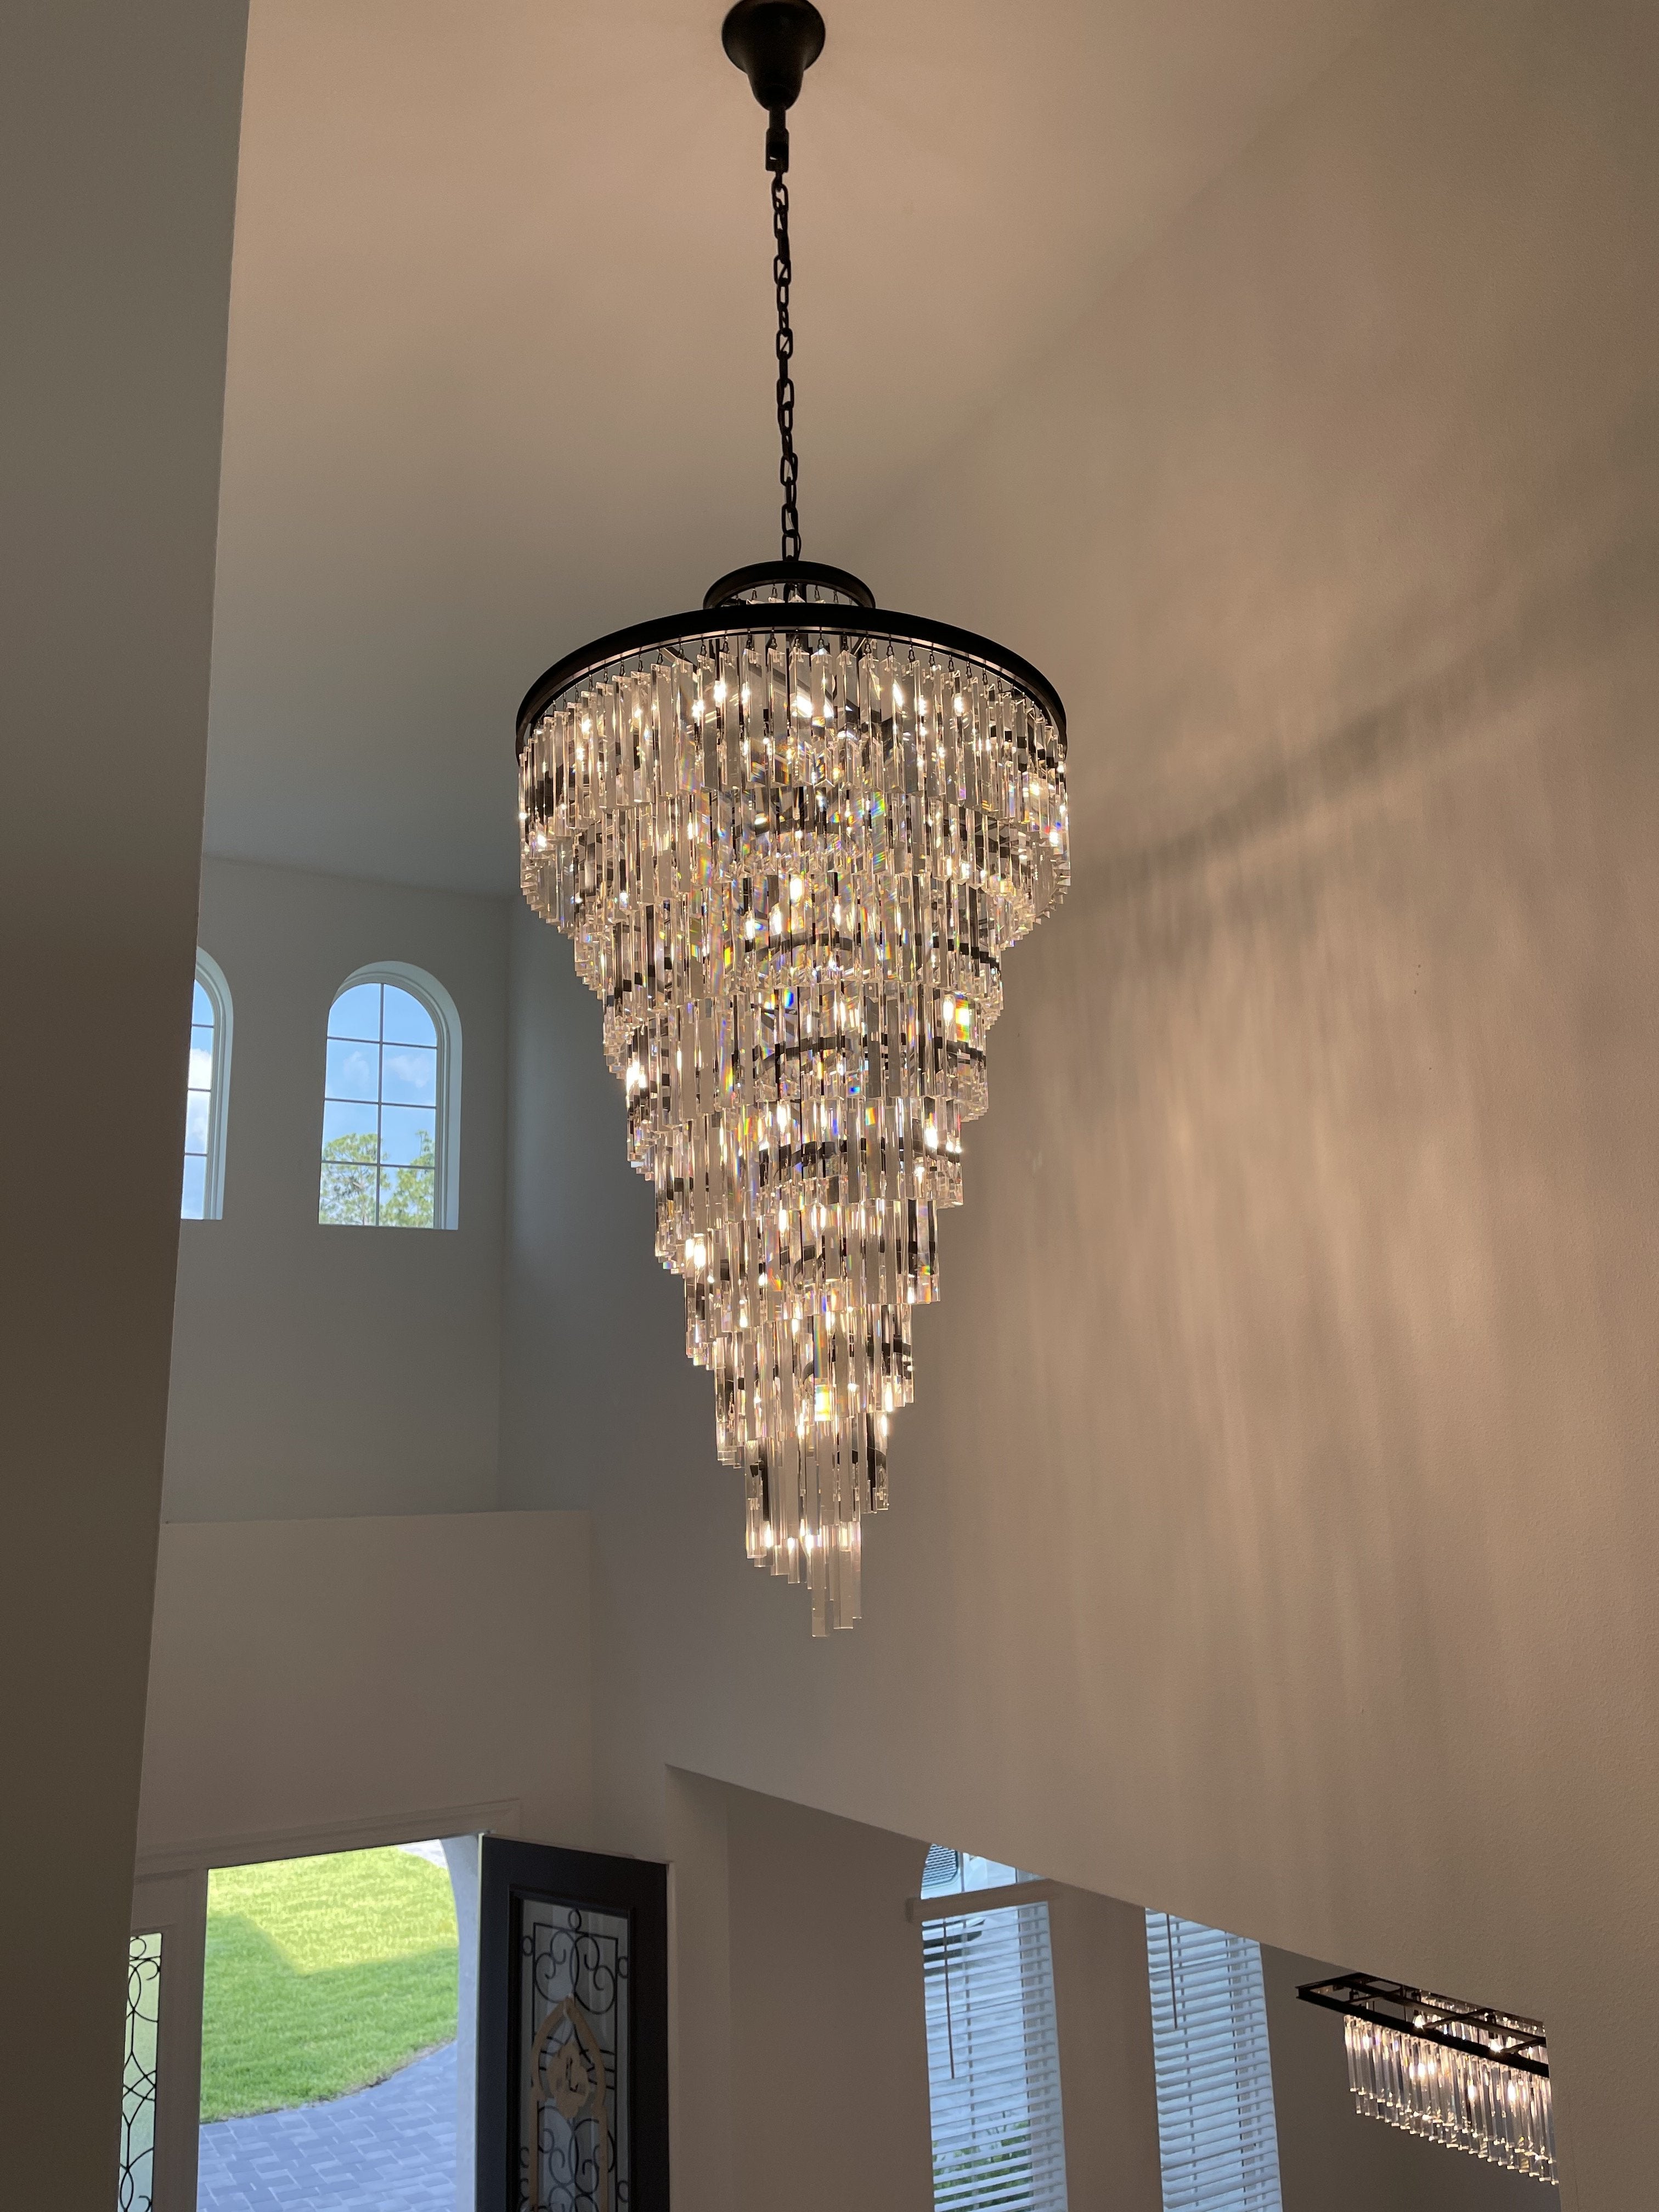 Apex Odeon Spiral Tiered/ Layered Crystal Fringe Chandelier 36" - Italian Concept - 